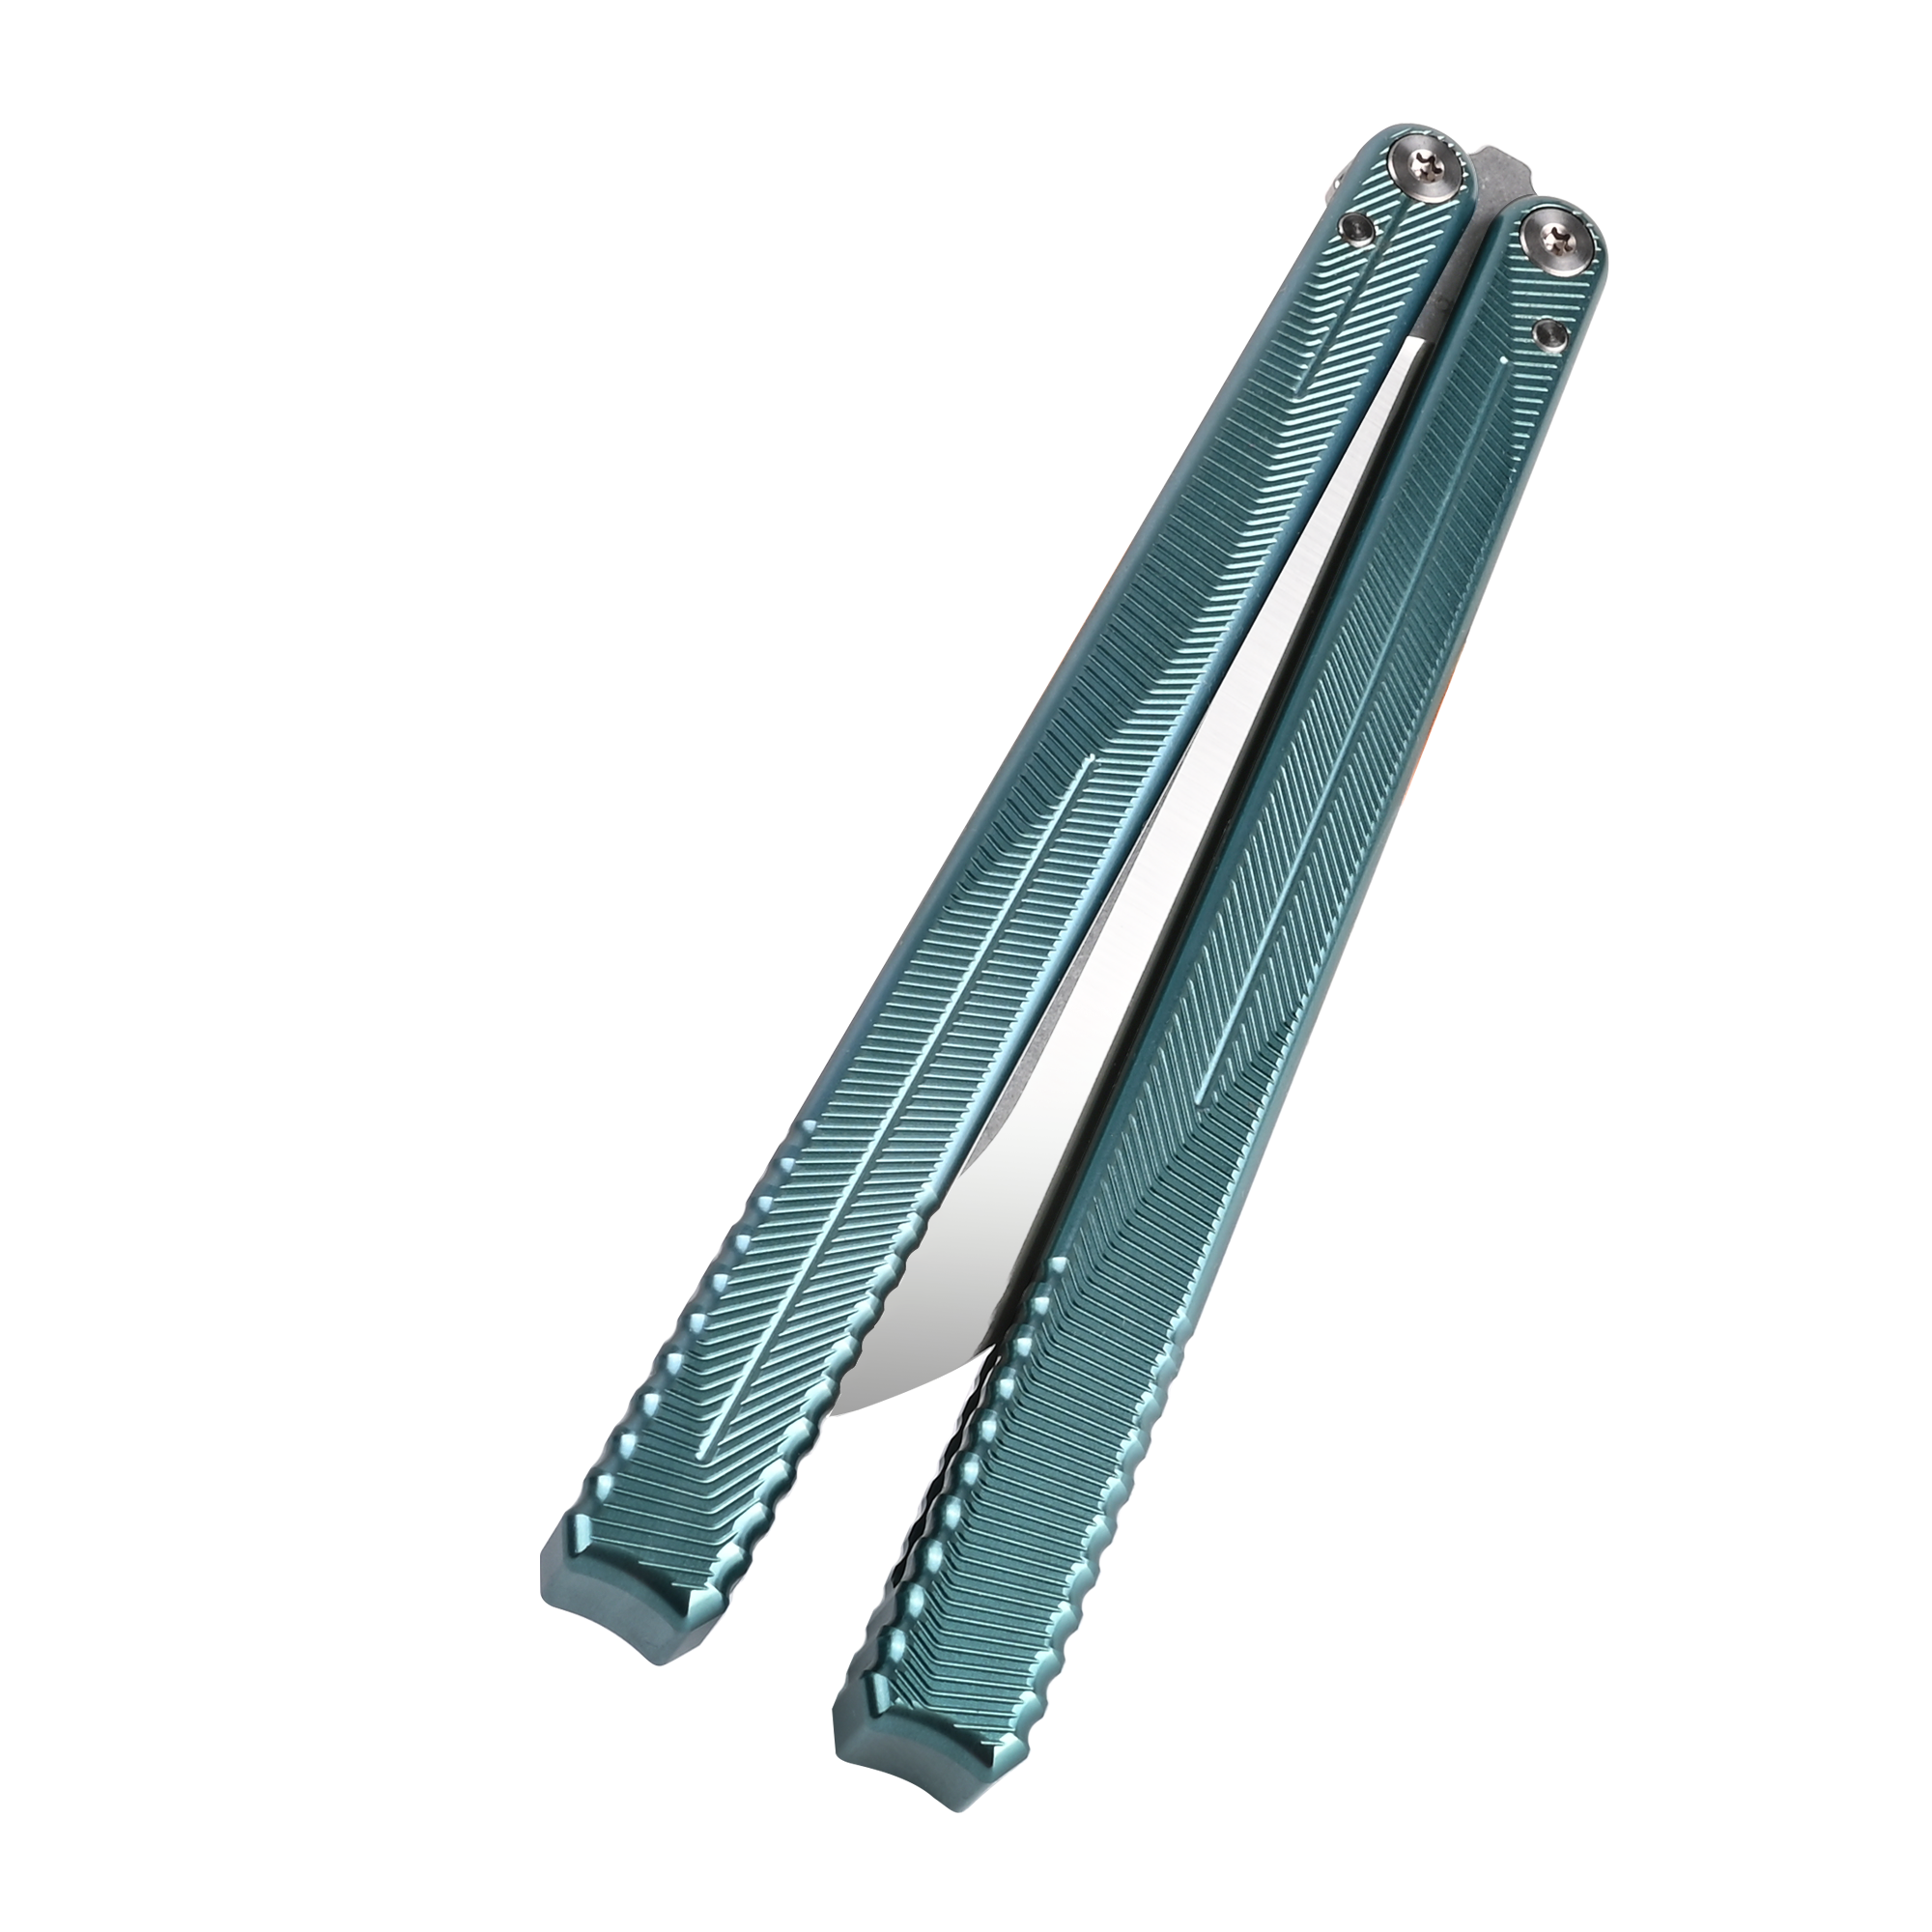 Nabalils Hydra Butterfly Knife Balisong Trainer Dull Blade-Teal-Closed